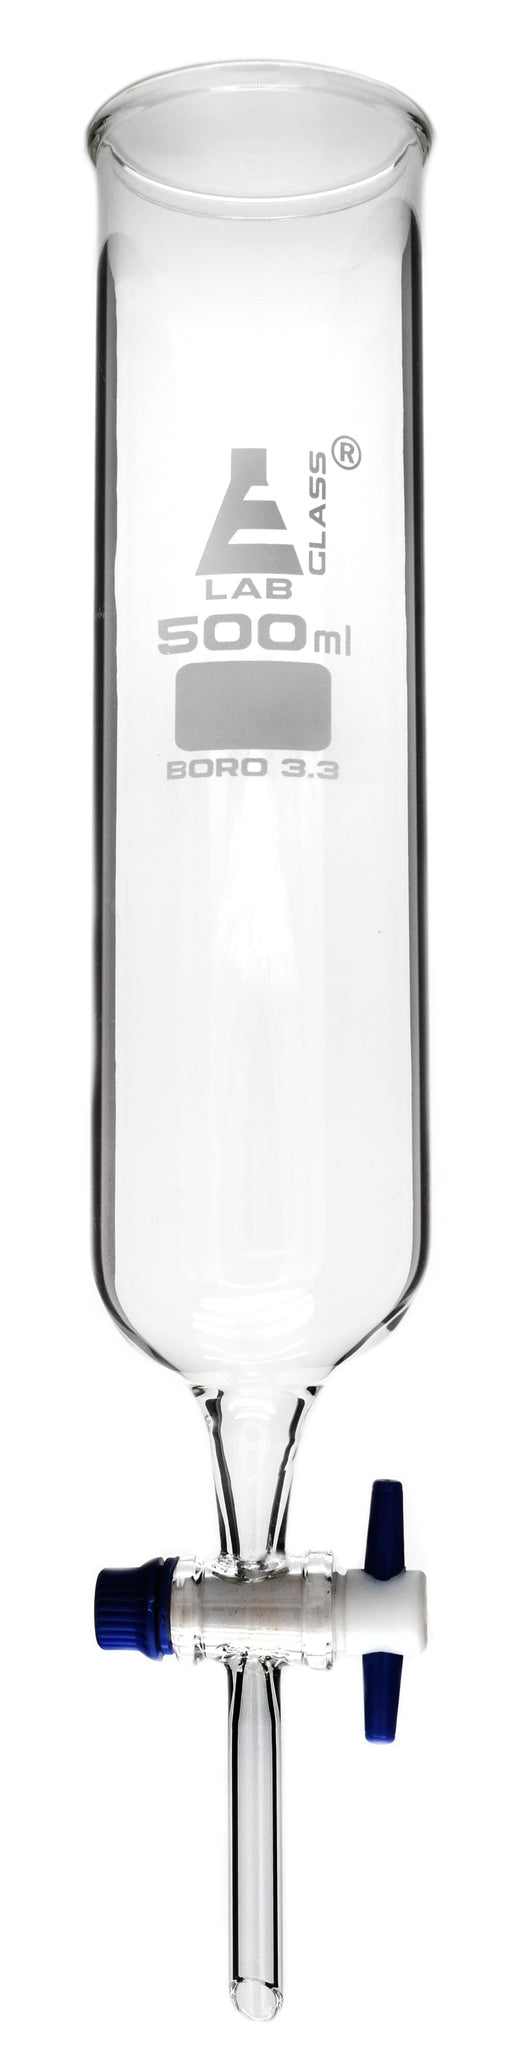 Dropping Funnel, 500ml - PTFE Key Stopcock, Open Top, Cylindrical - Ungraduated - Cylindrical, Borosilicate Glass - Eisco Labs